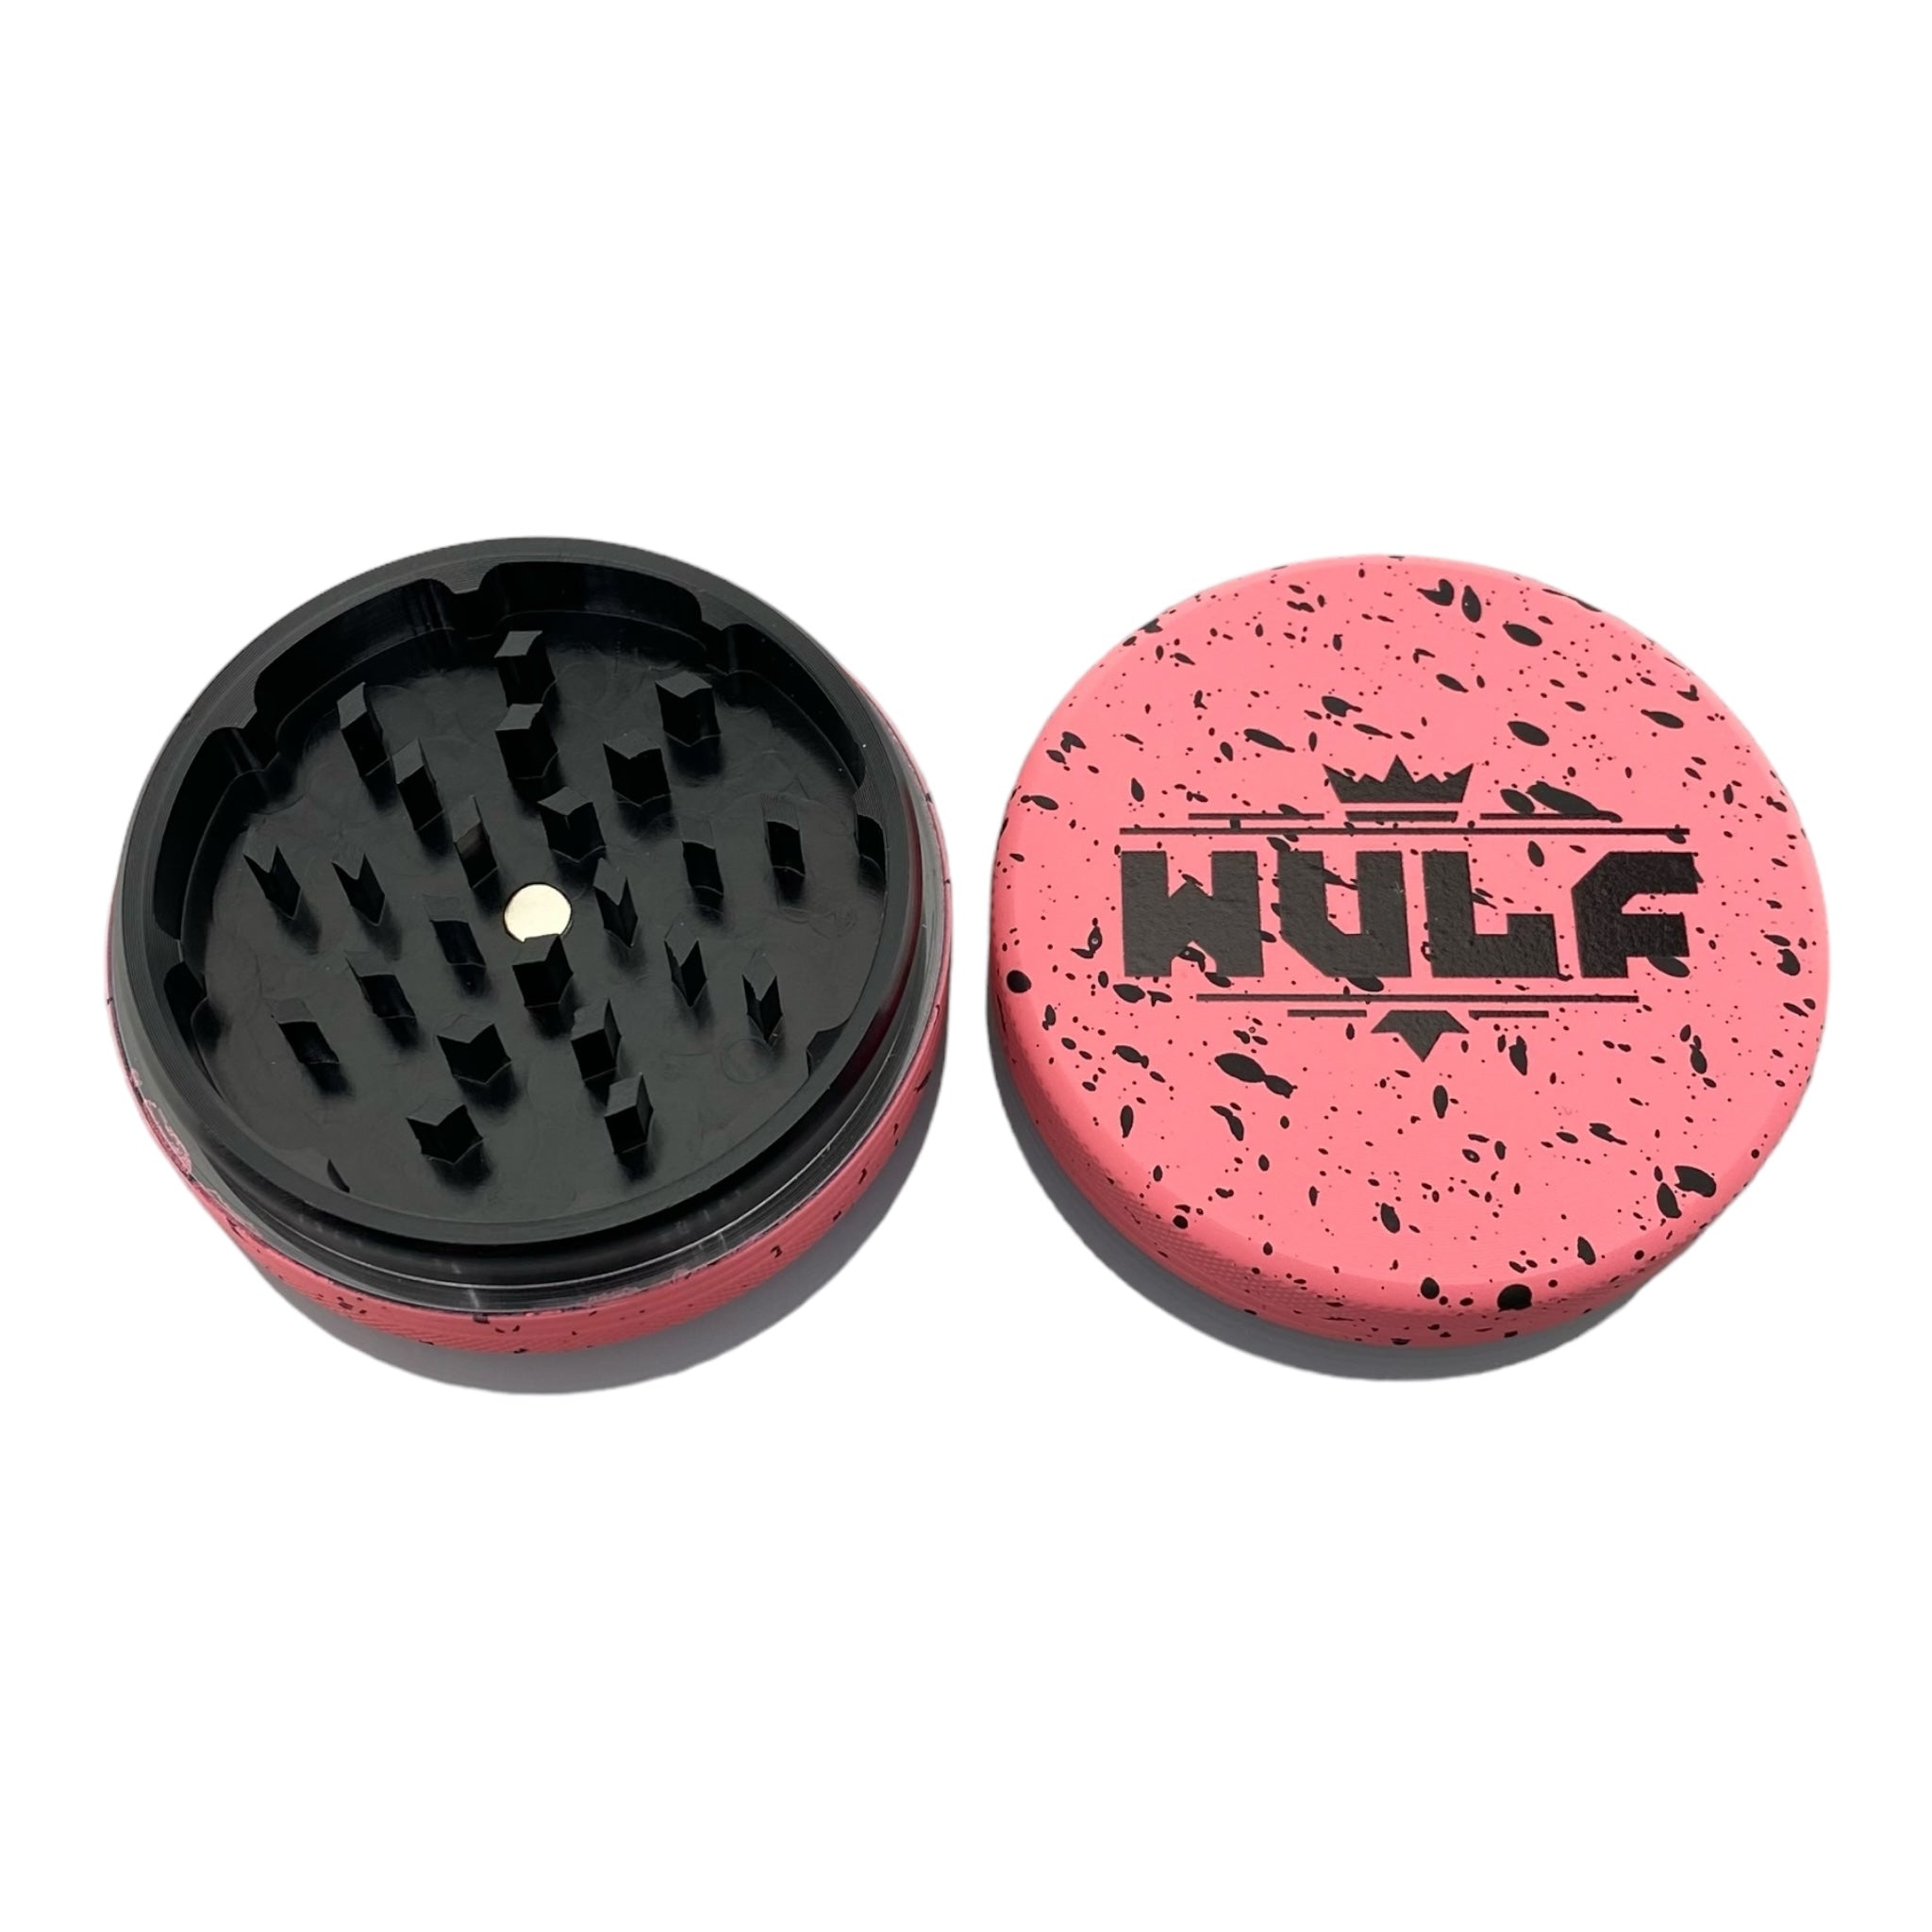 WULF Pink Two Piece Grinder for weed 65mm wide